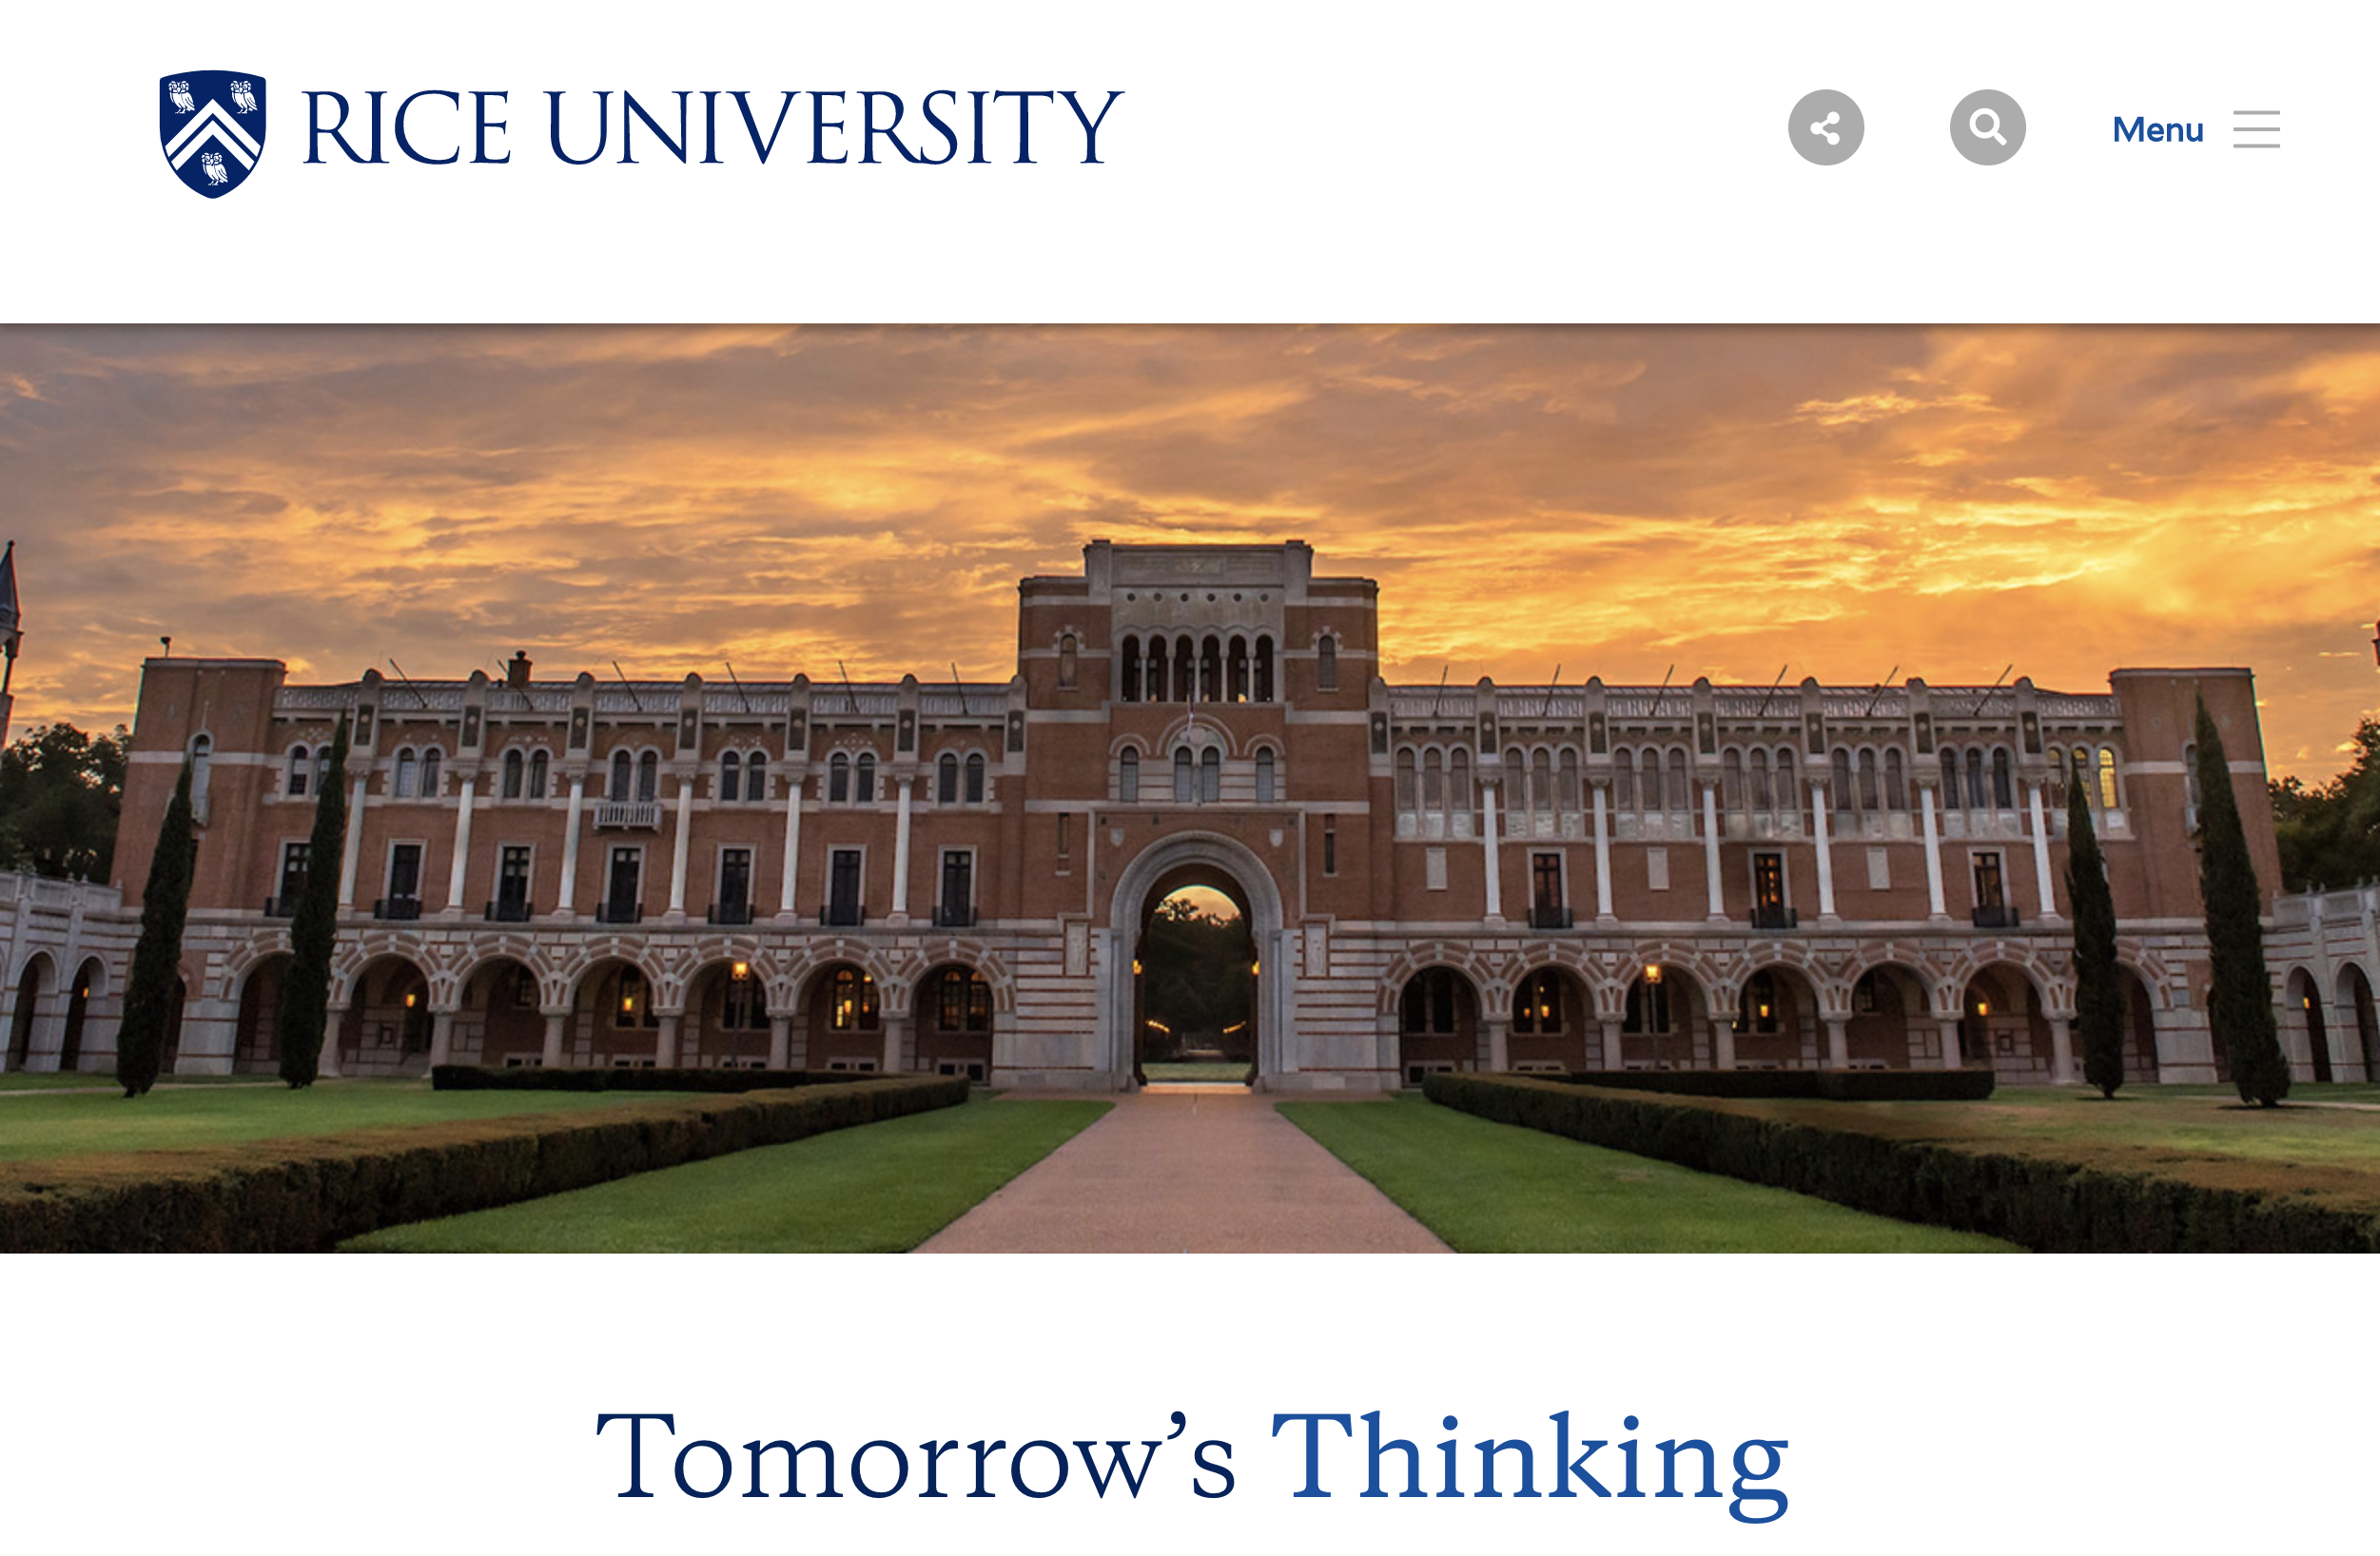 Rice university front building facade on the website hero banner